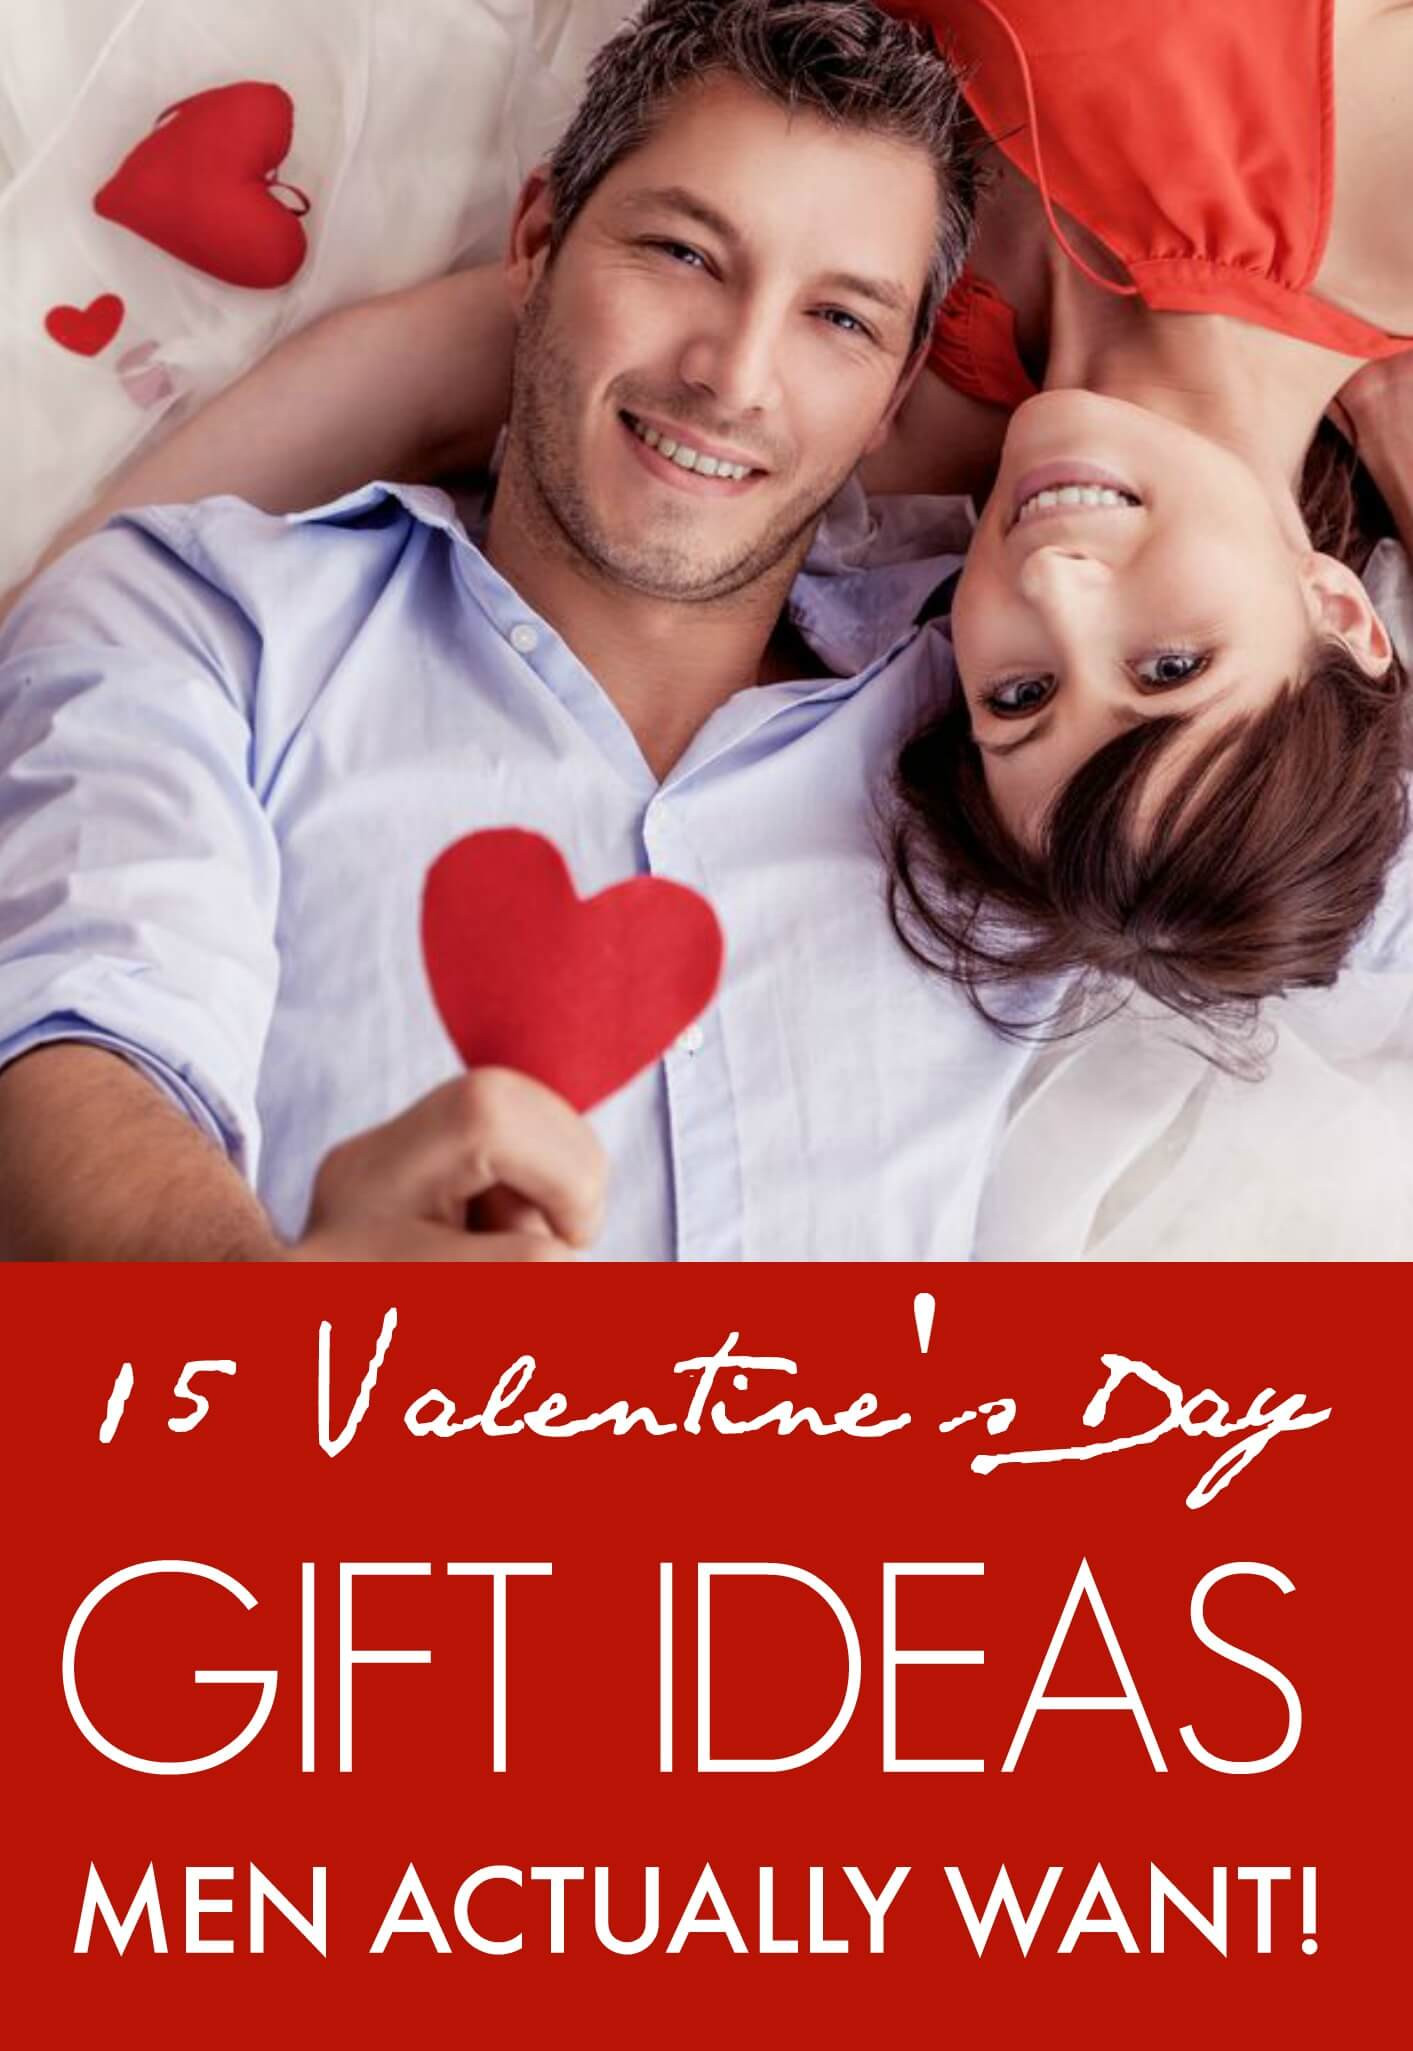 Gift Ideas For Men For Valentines Day
 15 Valentine’s Day Gift ideas Men Actually Want